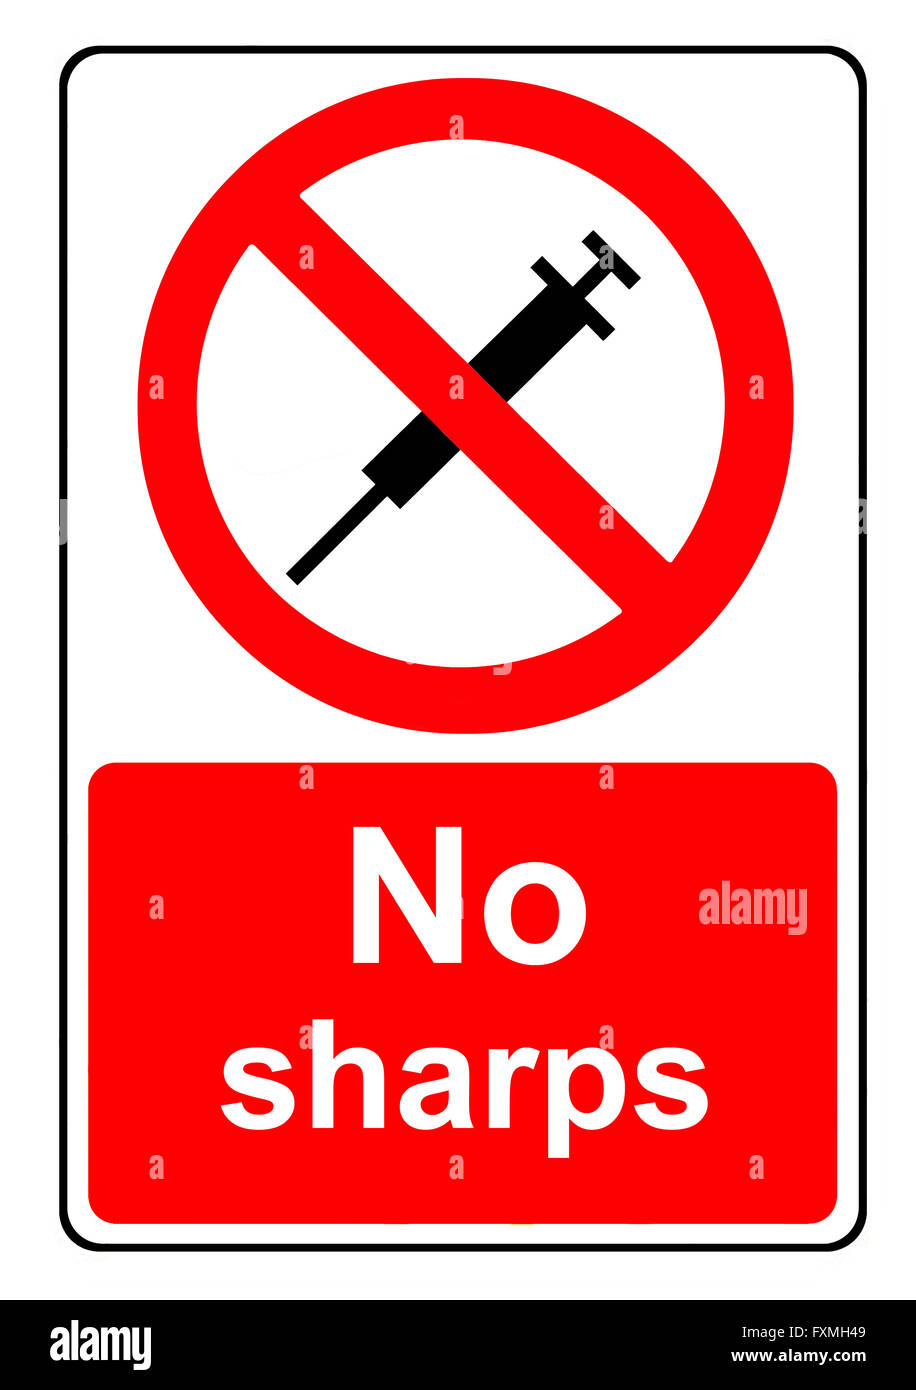 No sharps to be put into this container sign Stock Photo